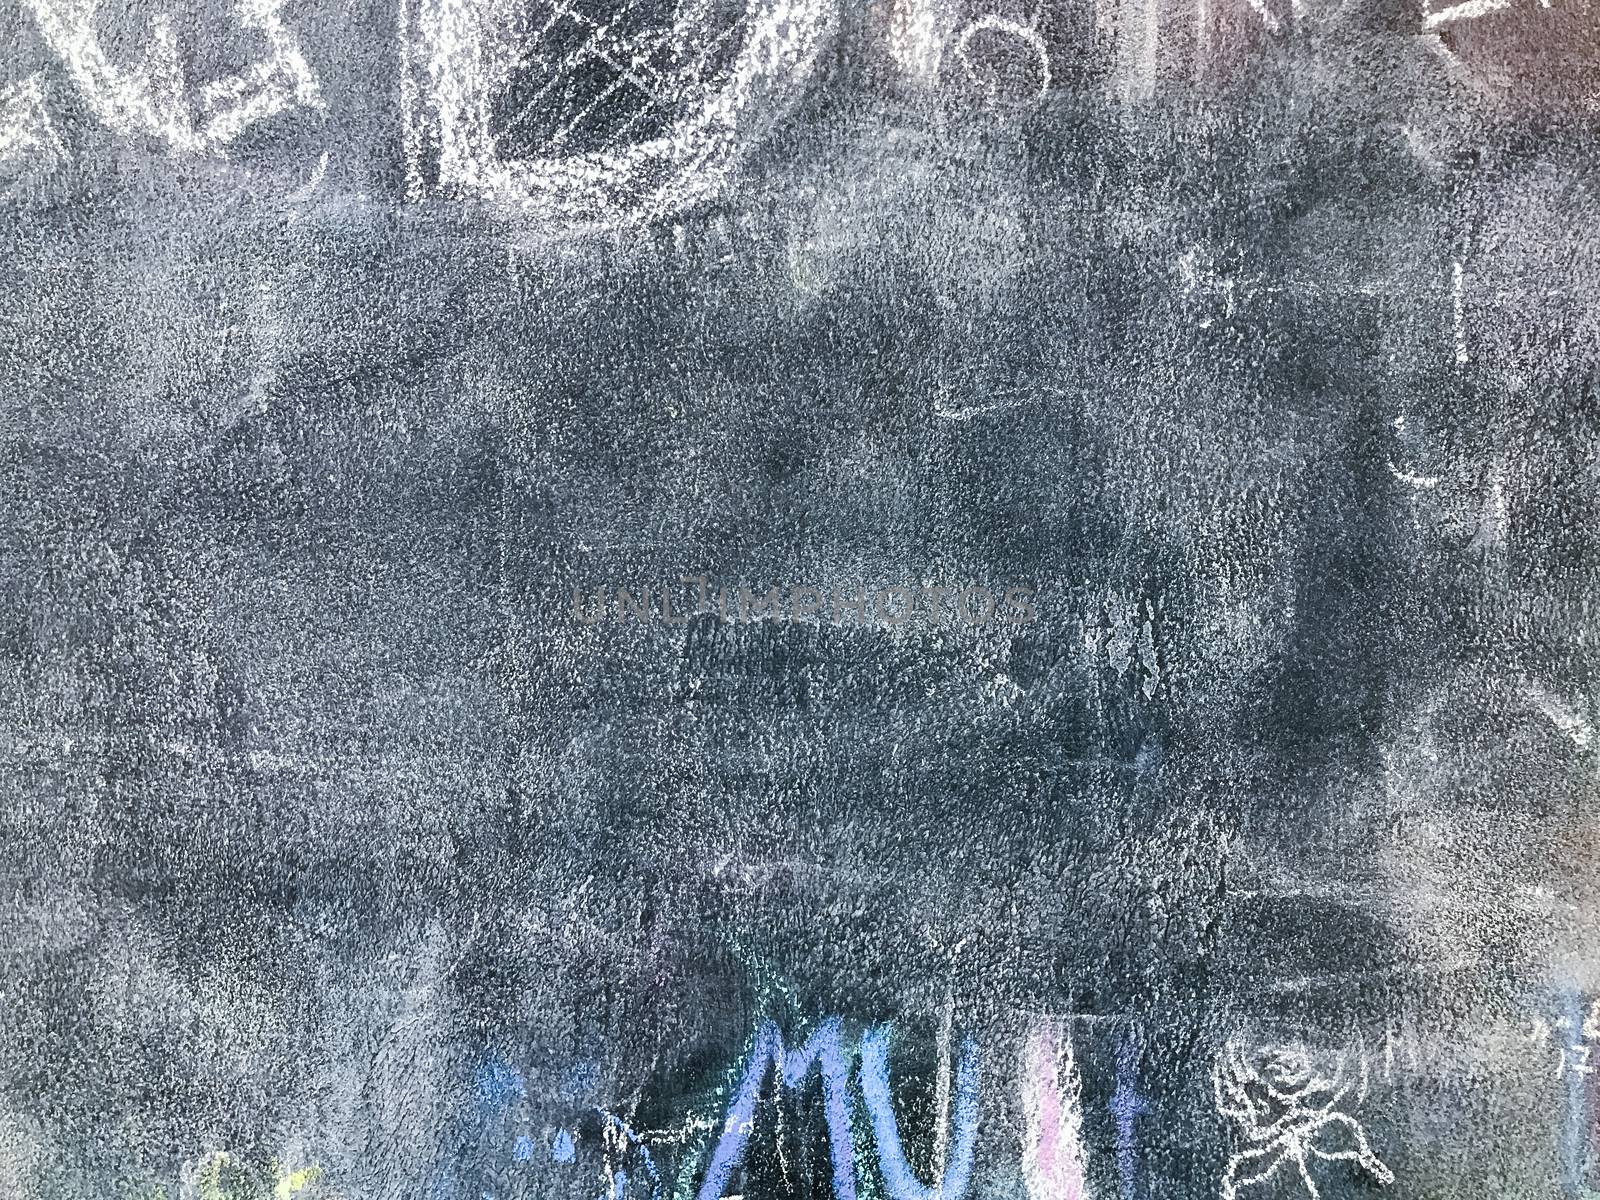 Back to school. Background with children scribbles painted by colorful chalk